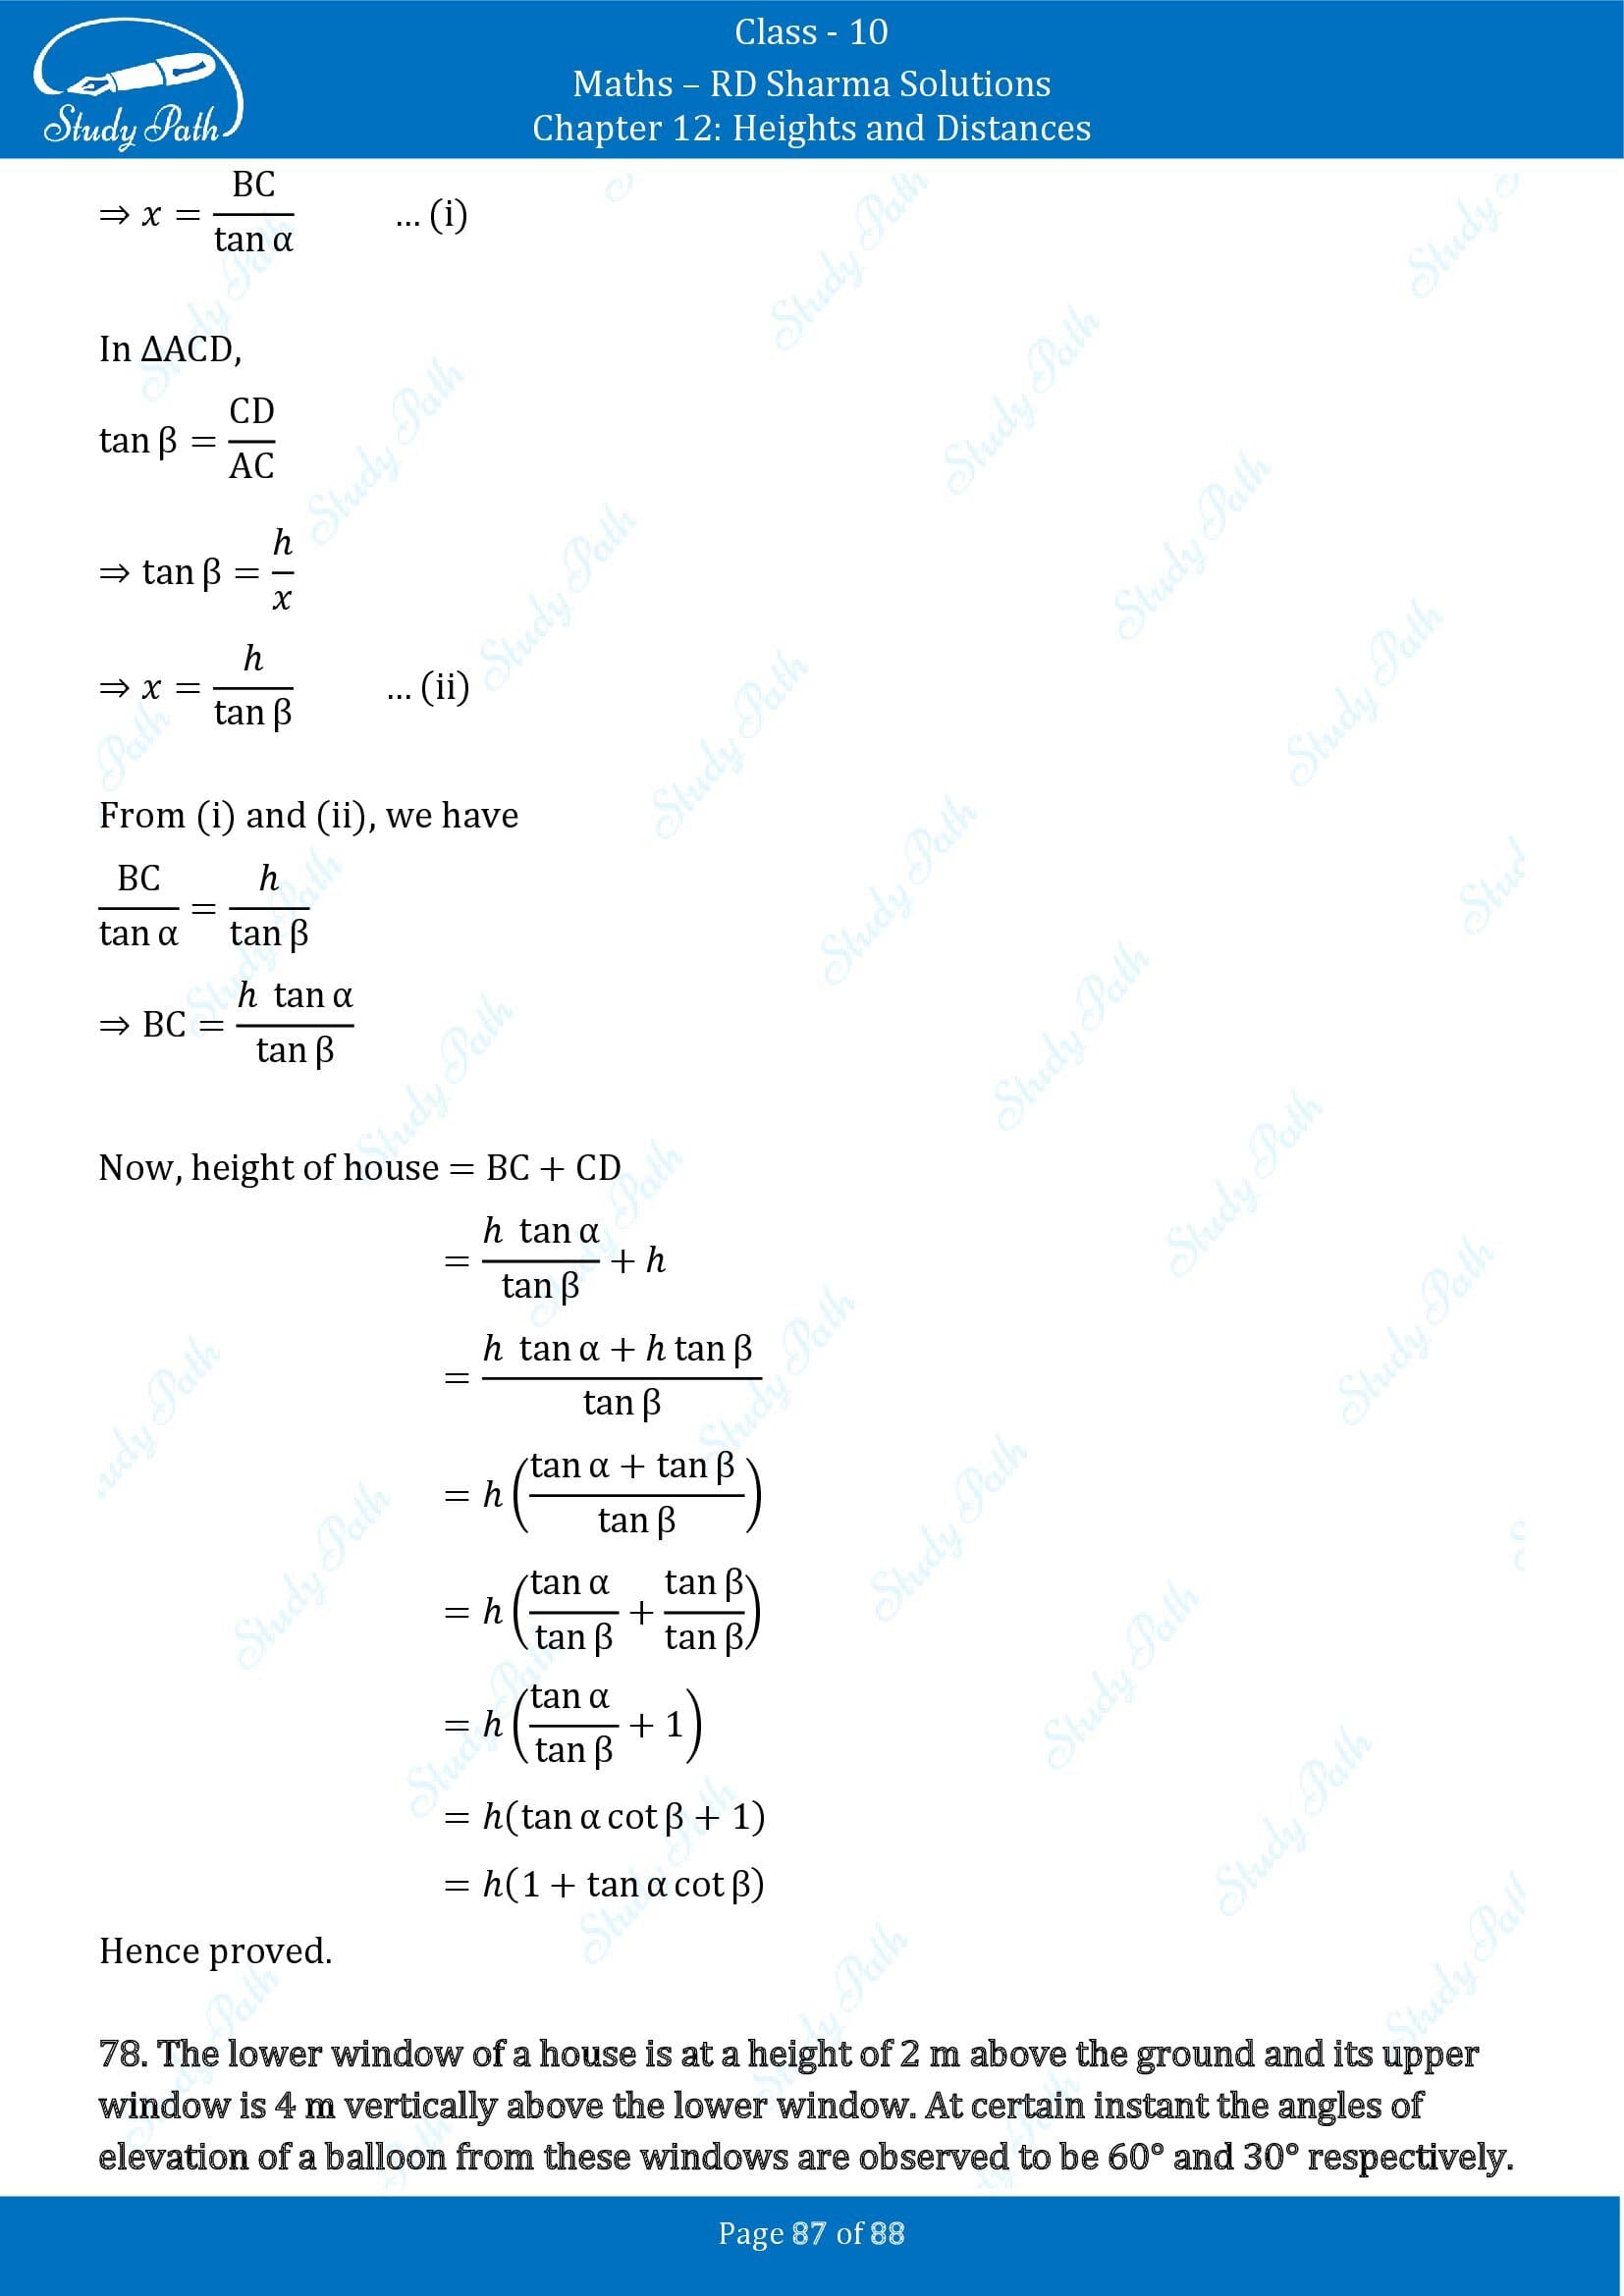 RD Sharma Solutions Class 10 Chapter 12 Heights and Distances Exercise 12.1 00087